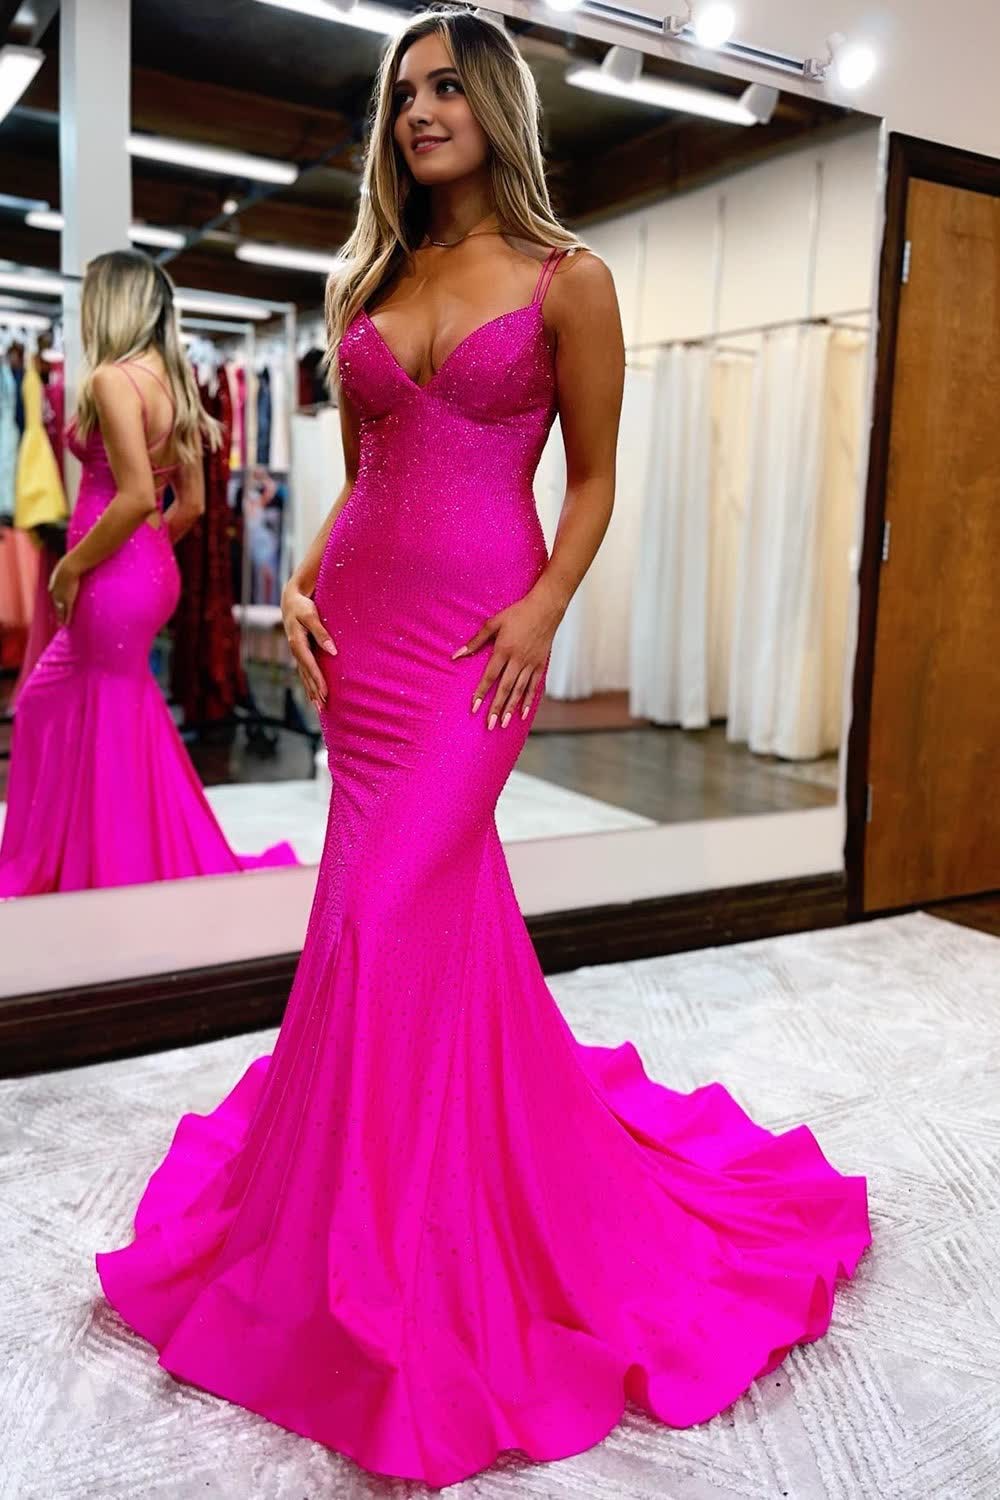 Hot Pink Sequined Spaghetti Straps Corset Prom Dress outfits, Hot Pink Sequined Spaghetti Straps Prom Dress